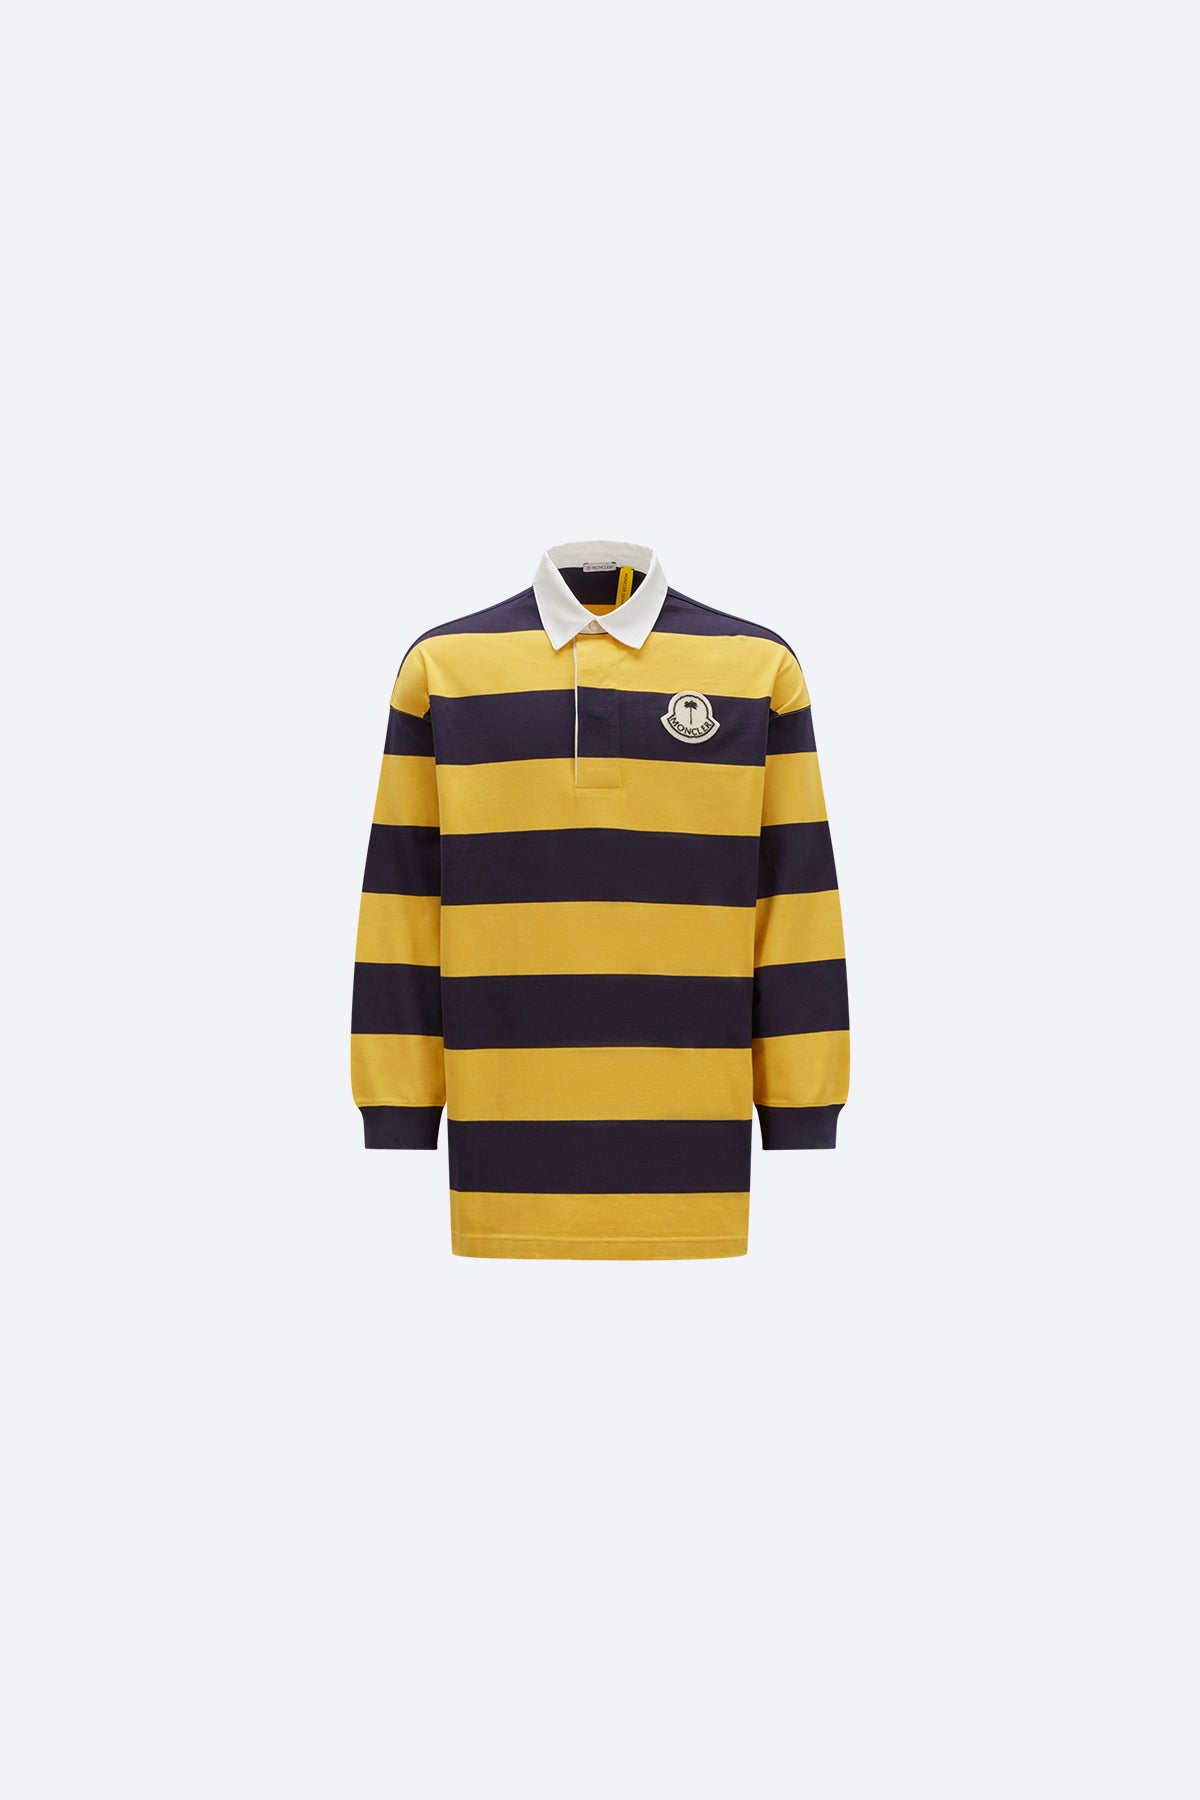 MONCLER X PALM ANGELS | STRIPED LONG SLEEVE POLO SHIRT